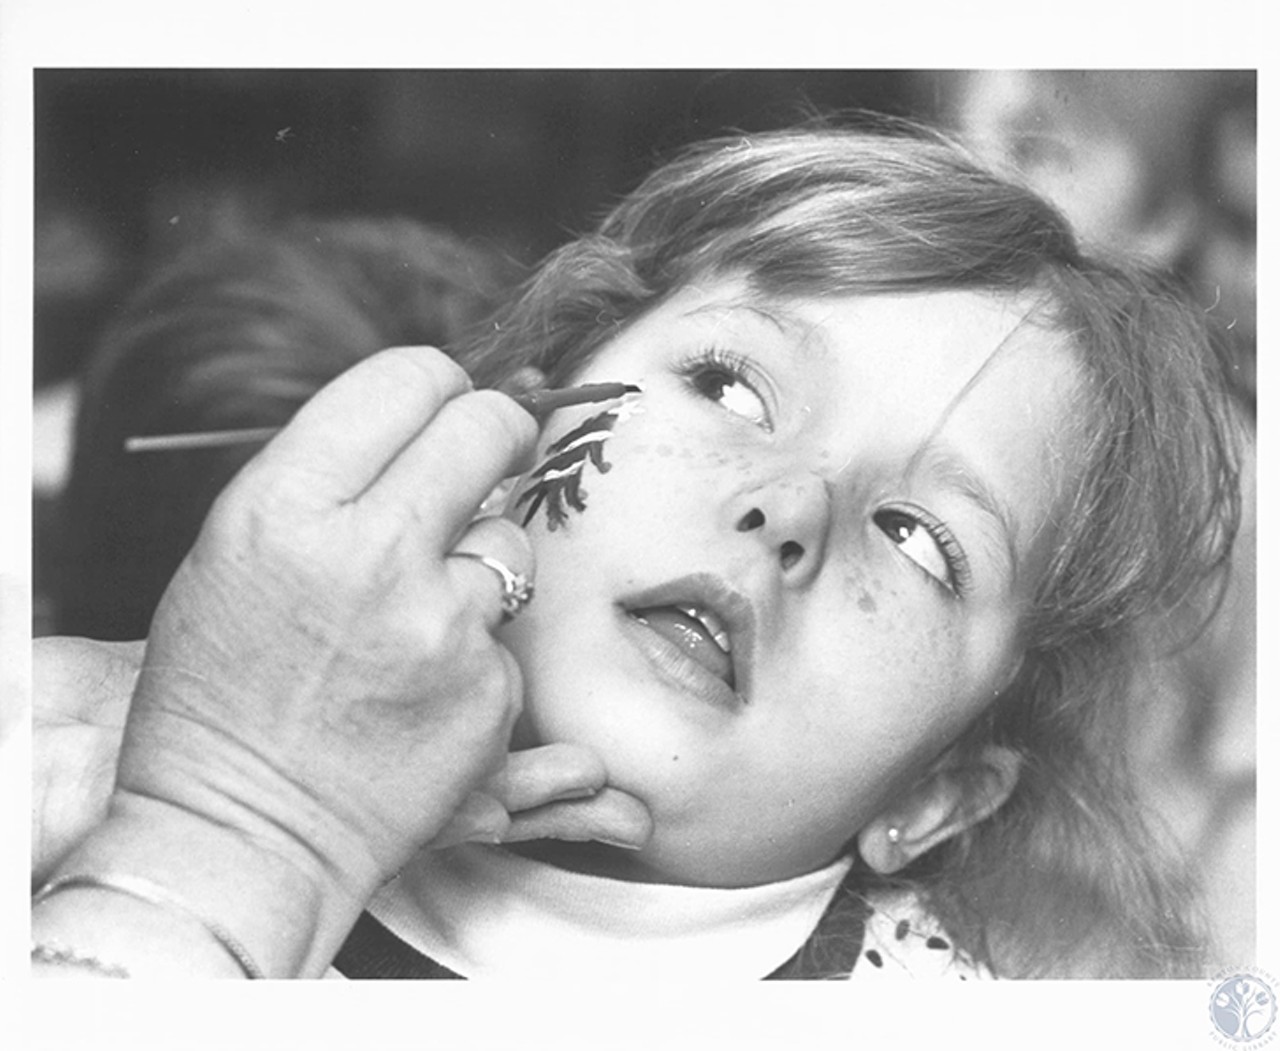 Covington, 1991
"Mary Courtney (7) gets Christmas tree painted on at Christmas party in Devou Park"